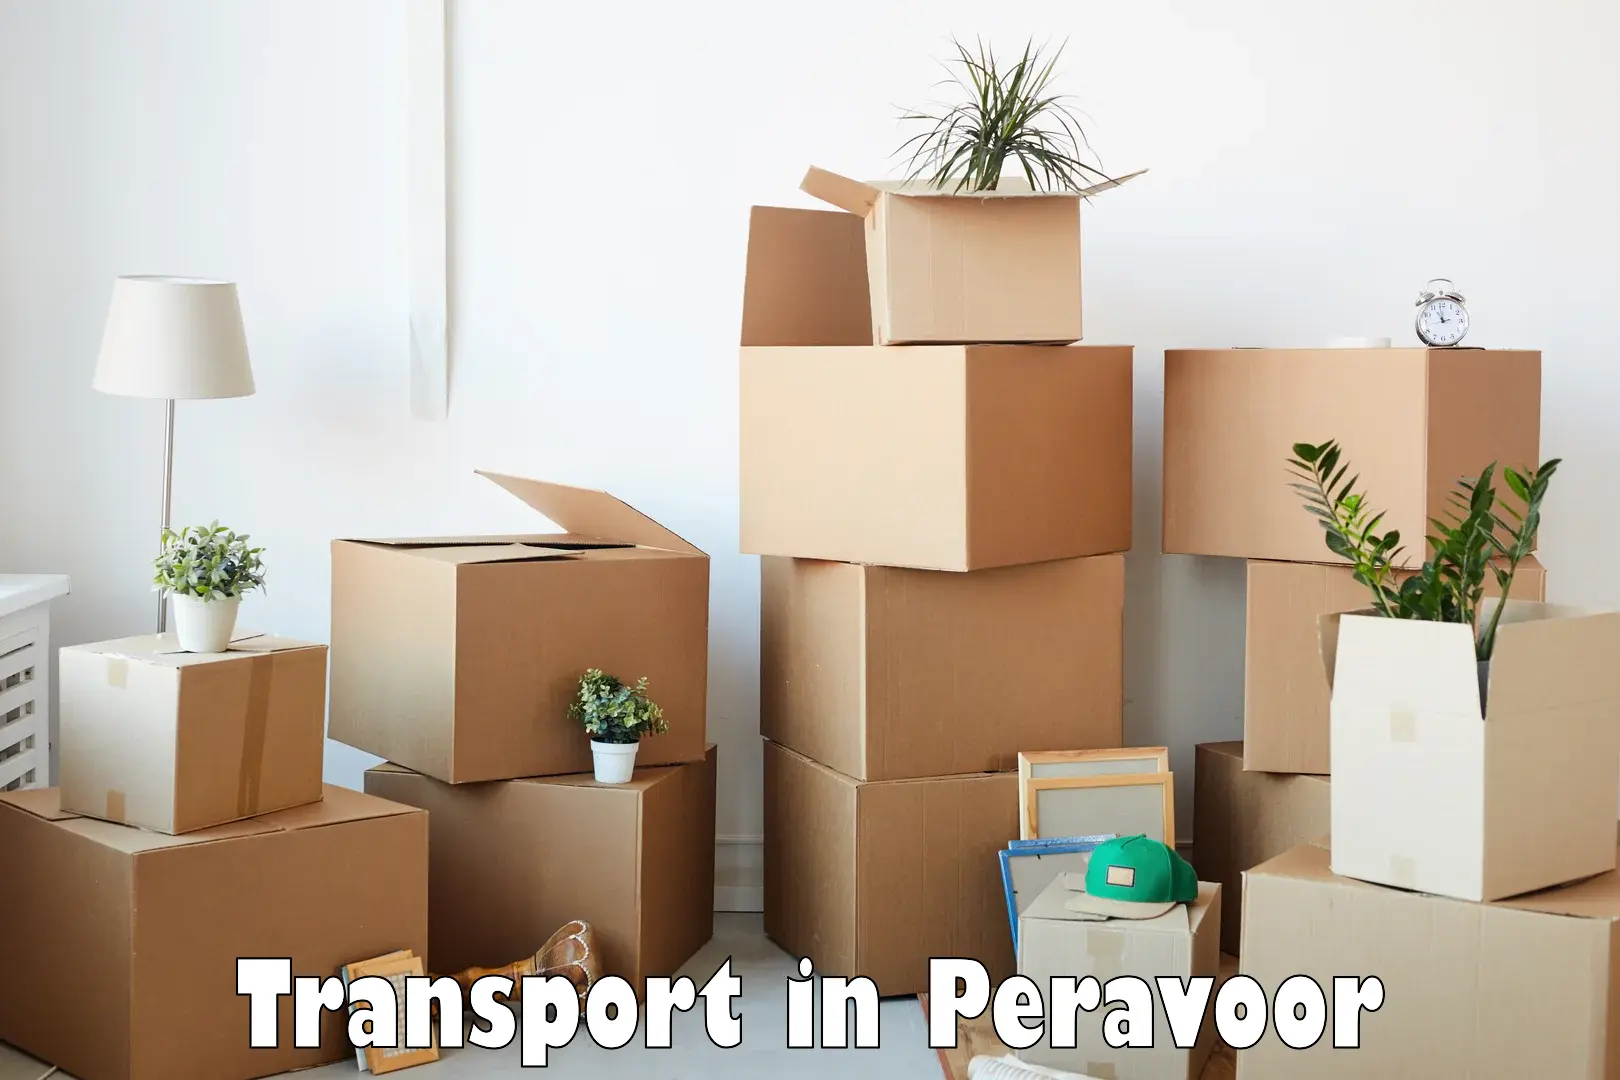 Domestic goods transportation services in Peravoor